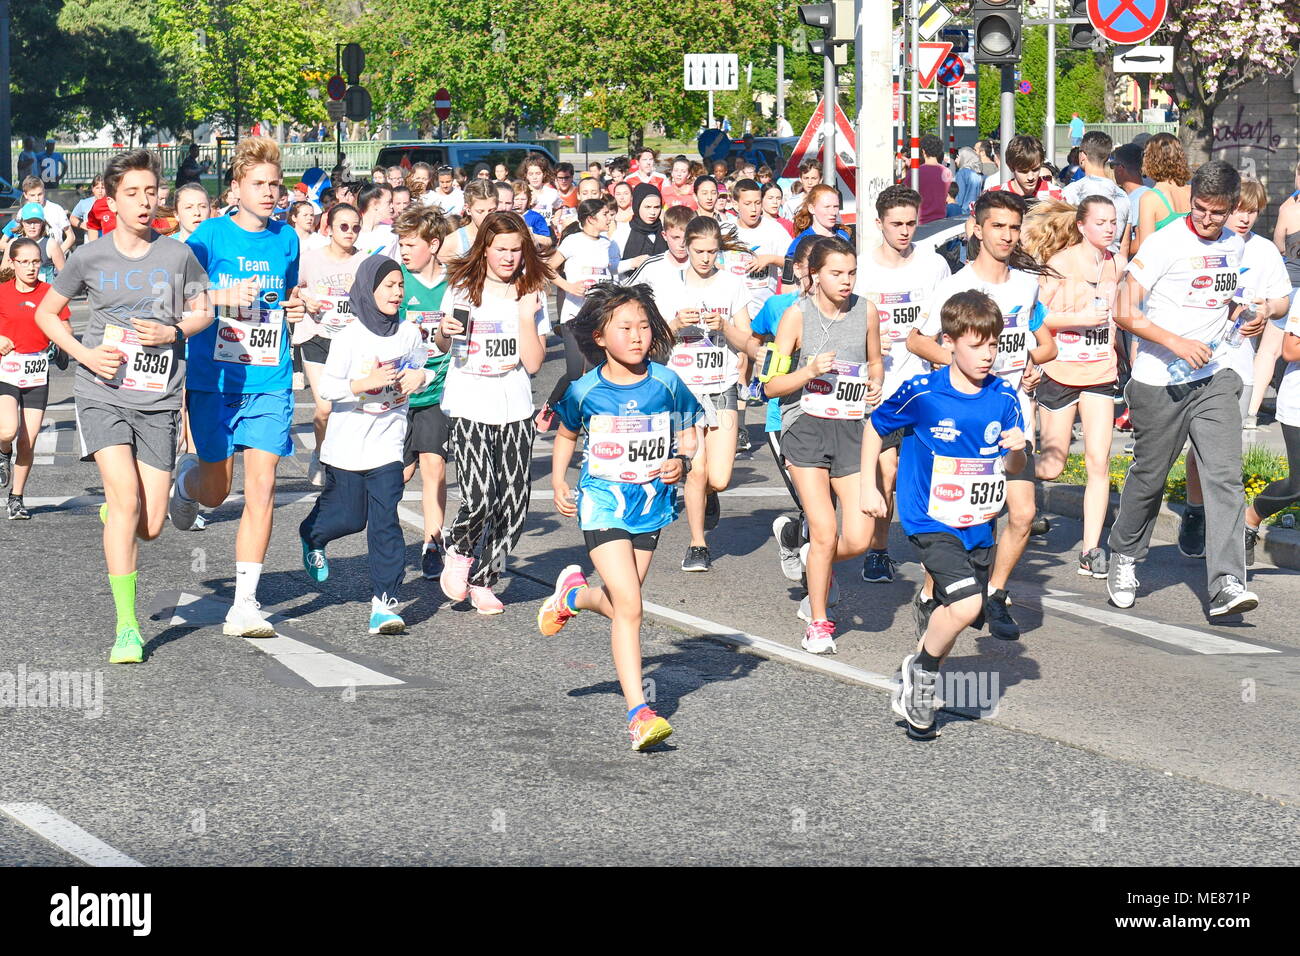 Vienna, Austria. April 21, 2018. AthleticsState Championships 10 km road running as part of the Vienna City Marathon from the Vienna Prater to the Burgtheater. Image shows the SanLucar kids run over 2 km and the GETMOVIN teen run over 5 km. Credit: Franz Perc / Alamy Live News Stock Photo